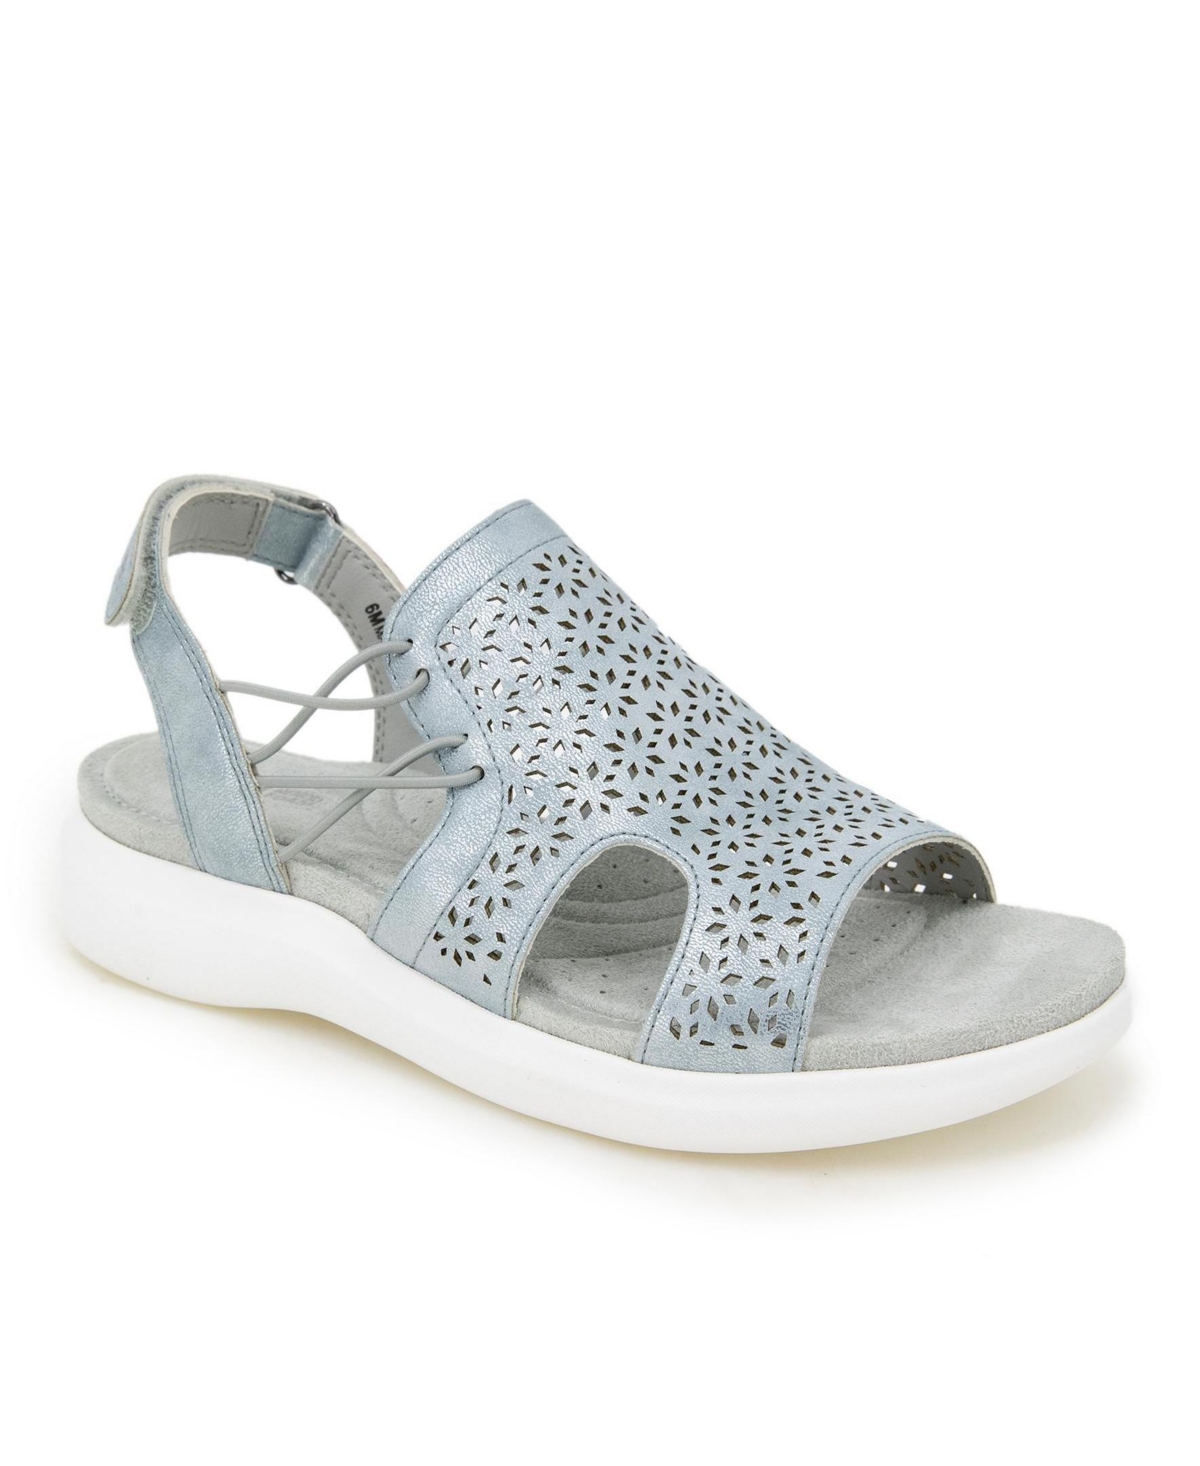 Women's Francis Hook and Loop Flat Sandals Shoe - Sky Blue Shimmer